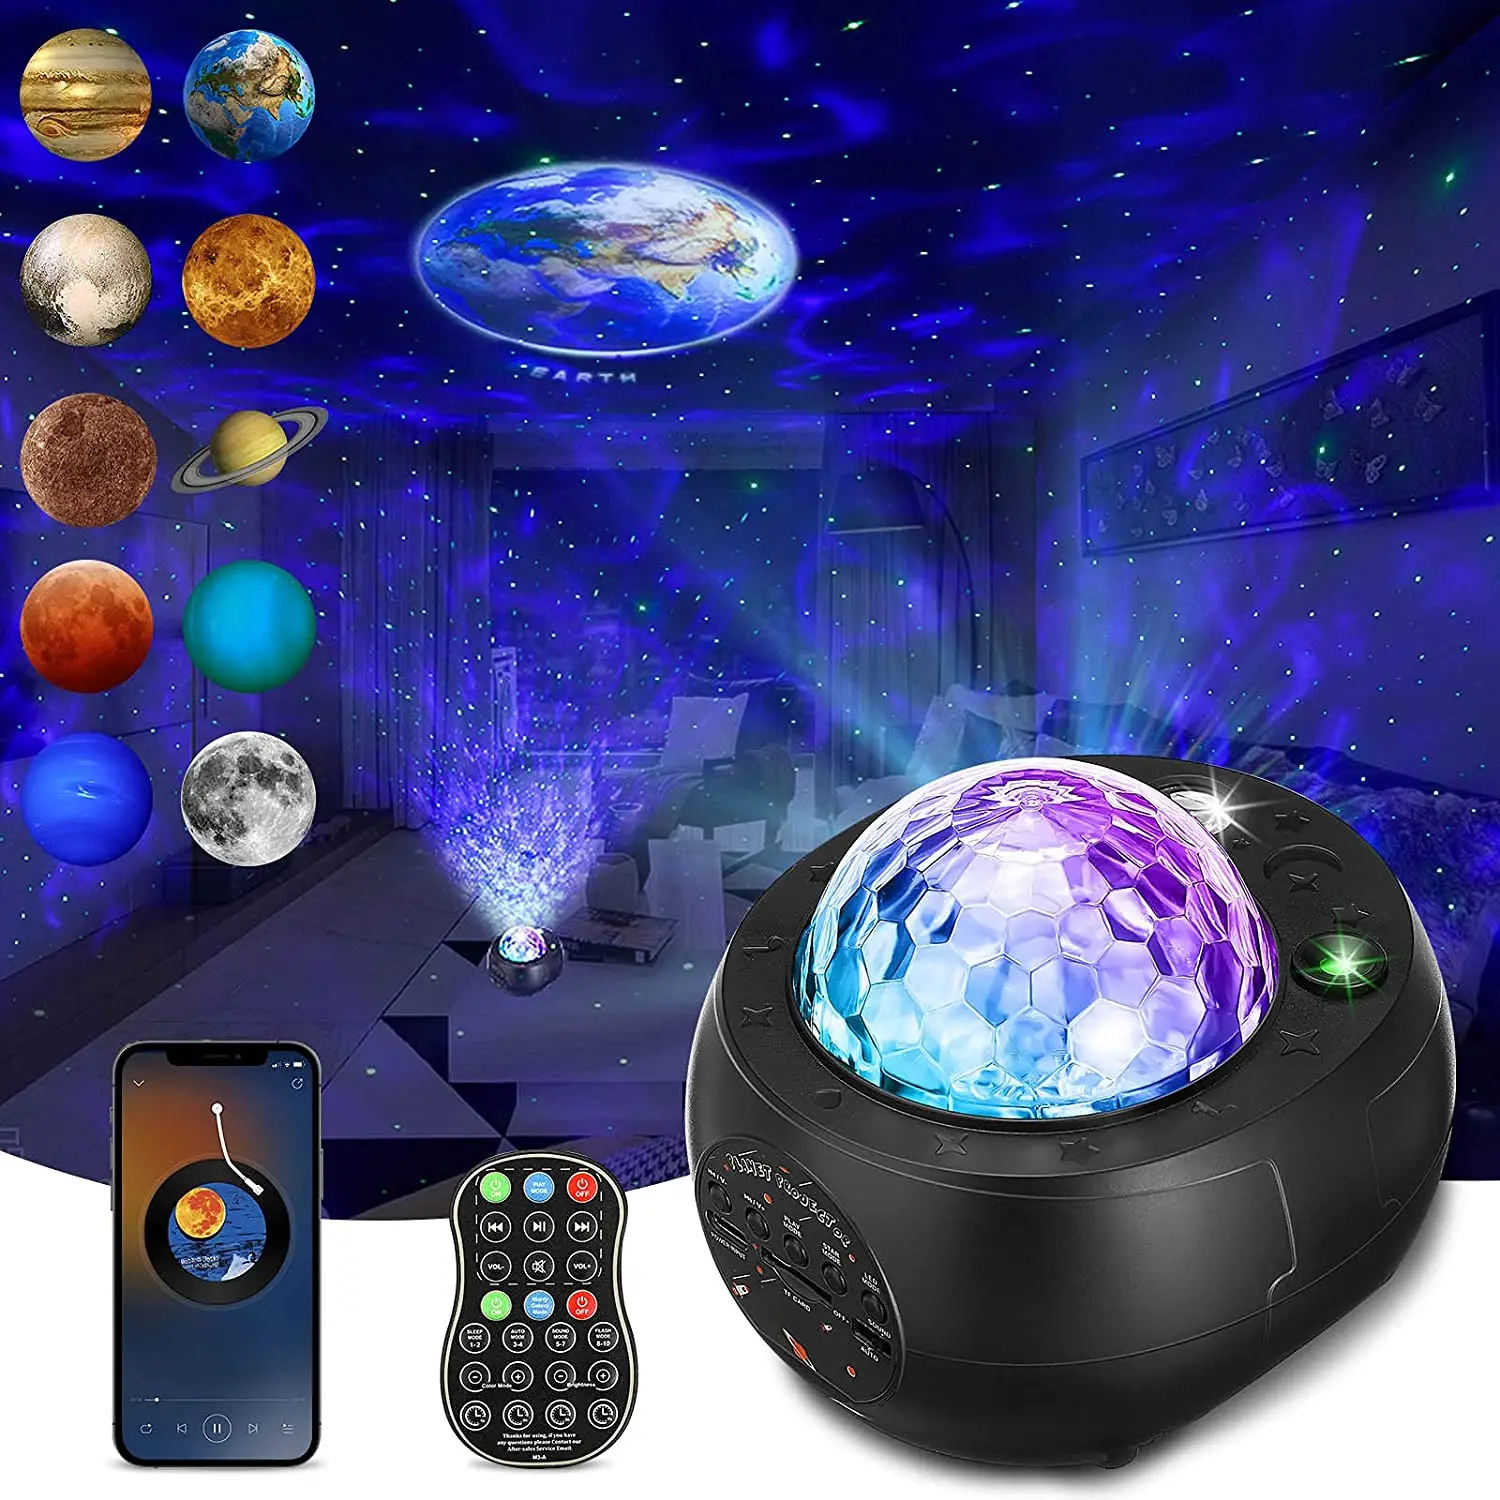 2in1 Bluetooth Speaker and Starry Galaxy Projector Night light-FREE SHIPPING! 